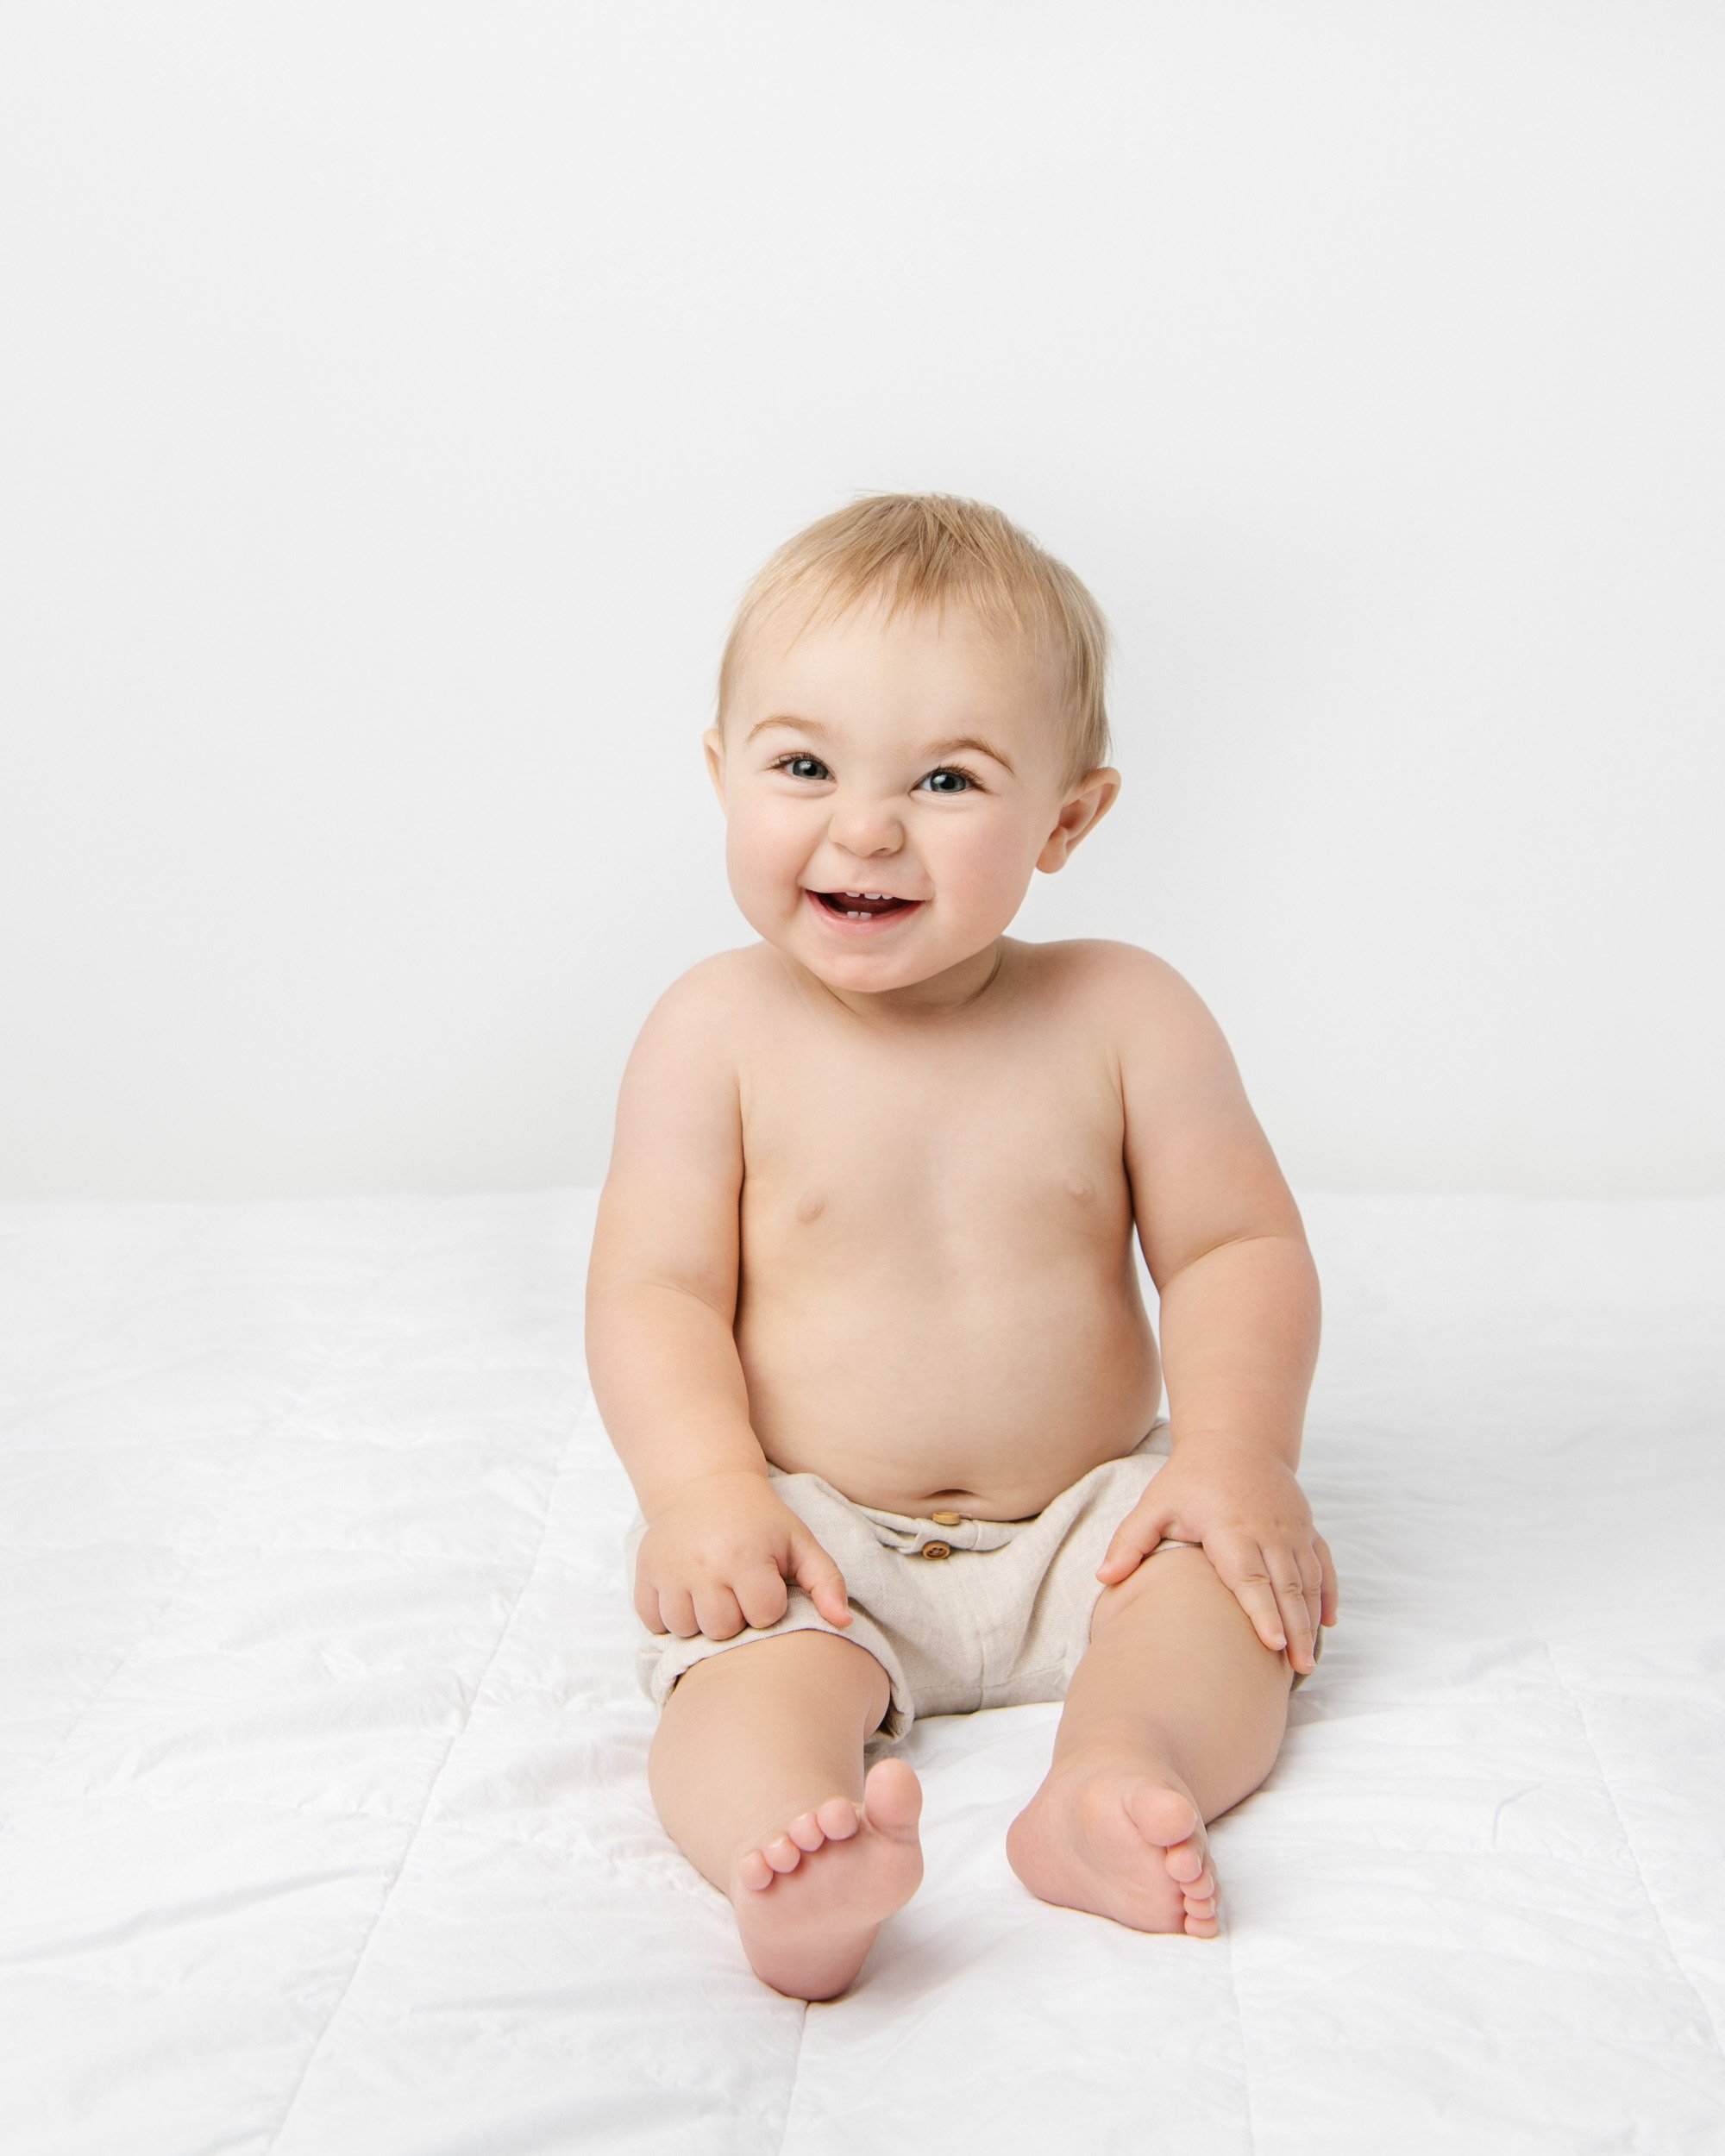  Nicole Hawkins Photography captures a portrait of a chunky little boy smiling in an all-white studio. chunky baby #NicoleHawkinsPhotography #NicoleHawkinsBabies #BirthdayStudioPhotography #smashcake #firstbirthday #studiobabiesandchildren 